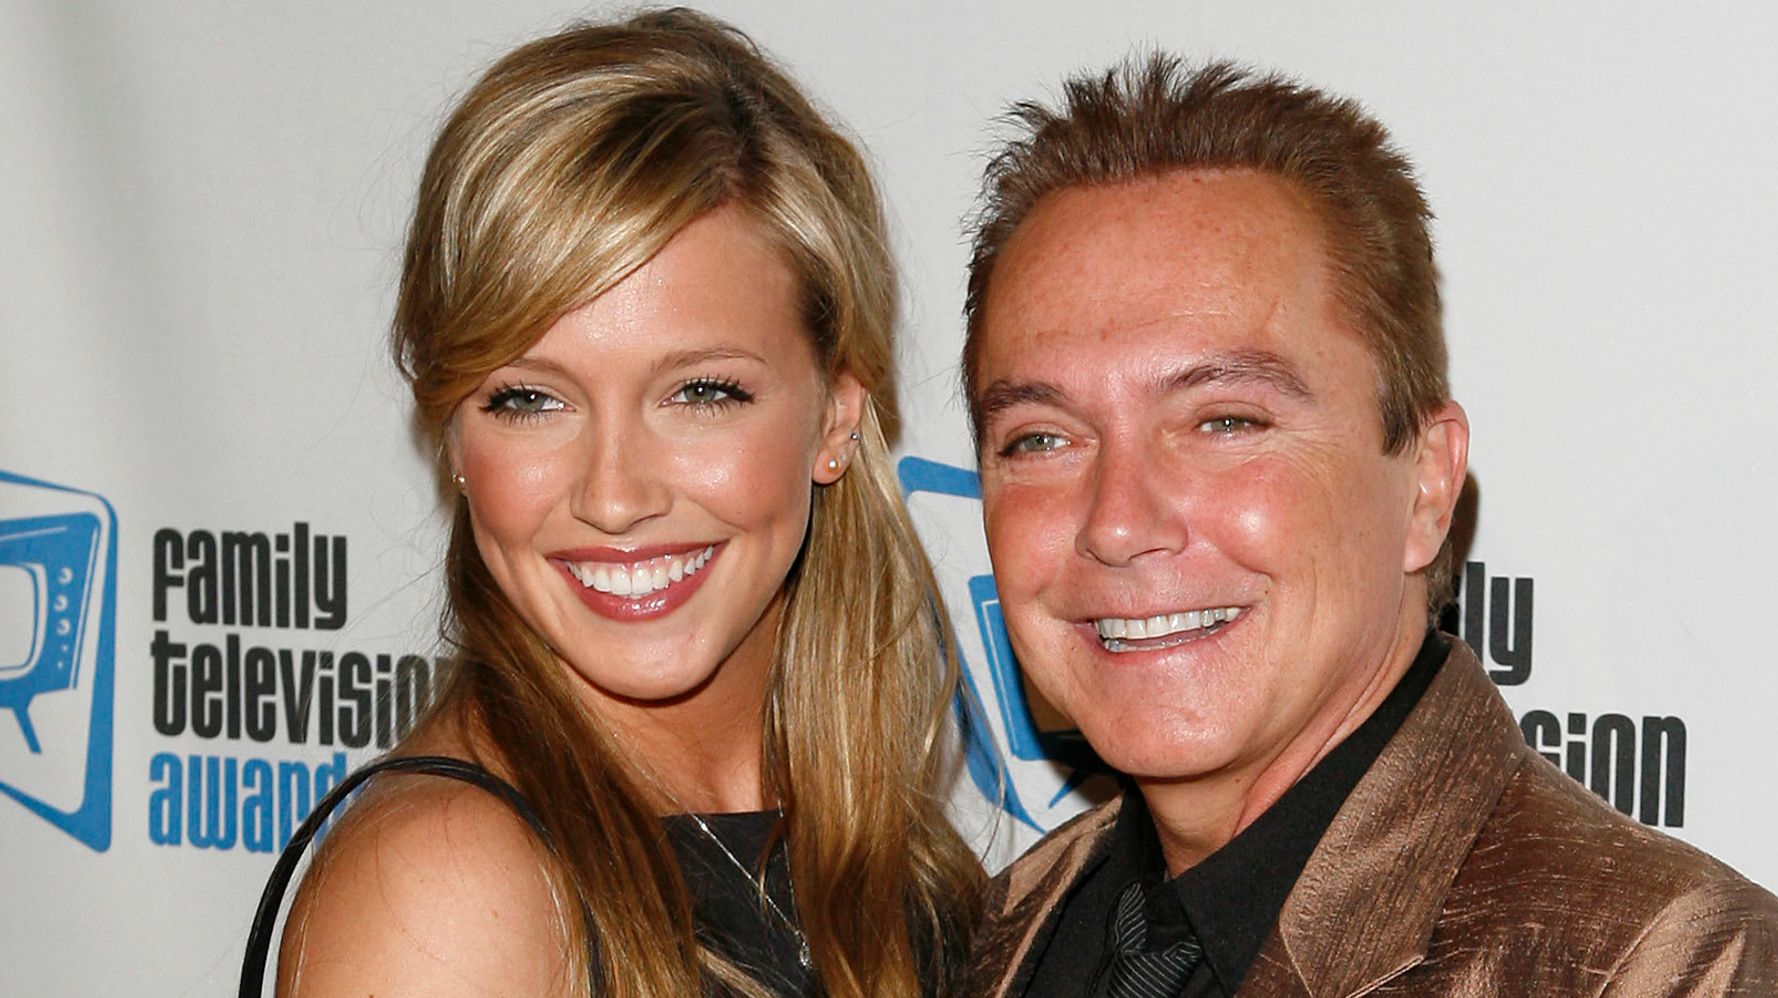 David Cassidy Completely Cuts Daughter Katie Cassidy Out Of His Will